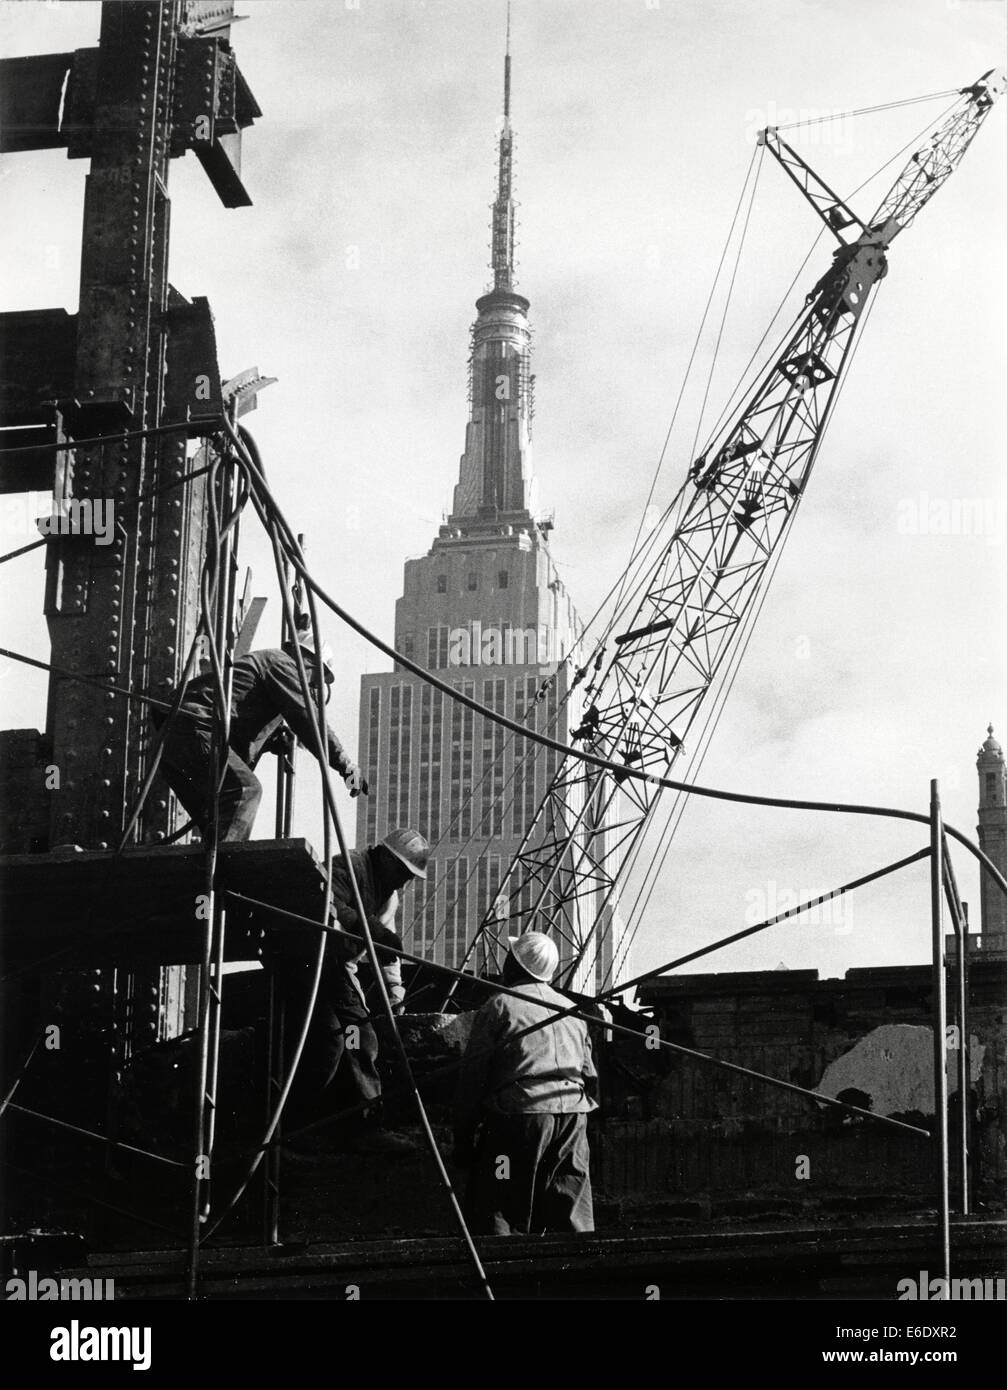 Demolition Workers Removing Remains of Pennsylvania Station with Empire State Building in Background, New York City, USA, 1966 Stock Photo